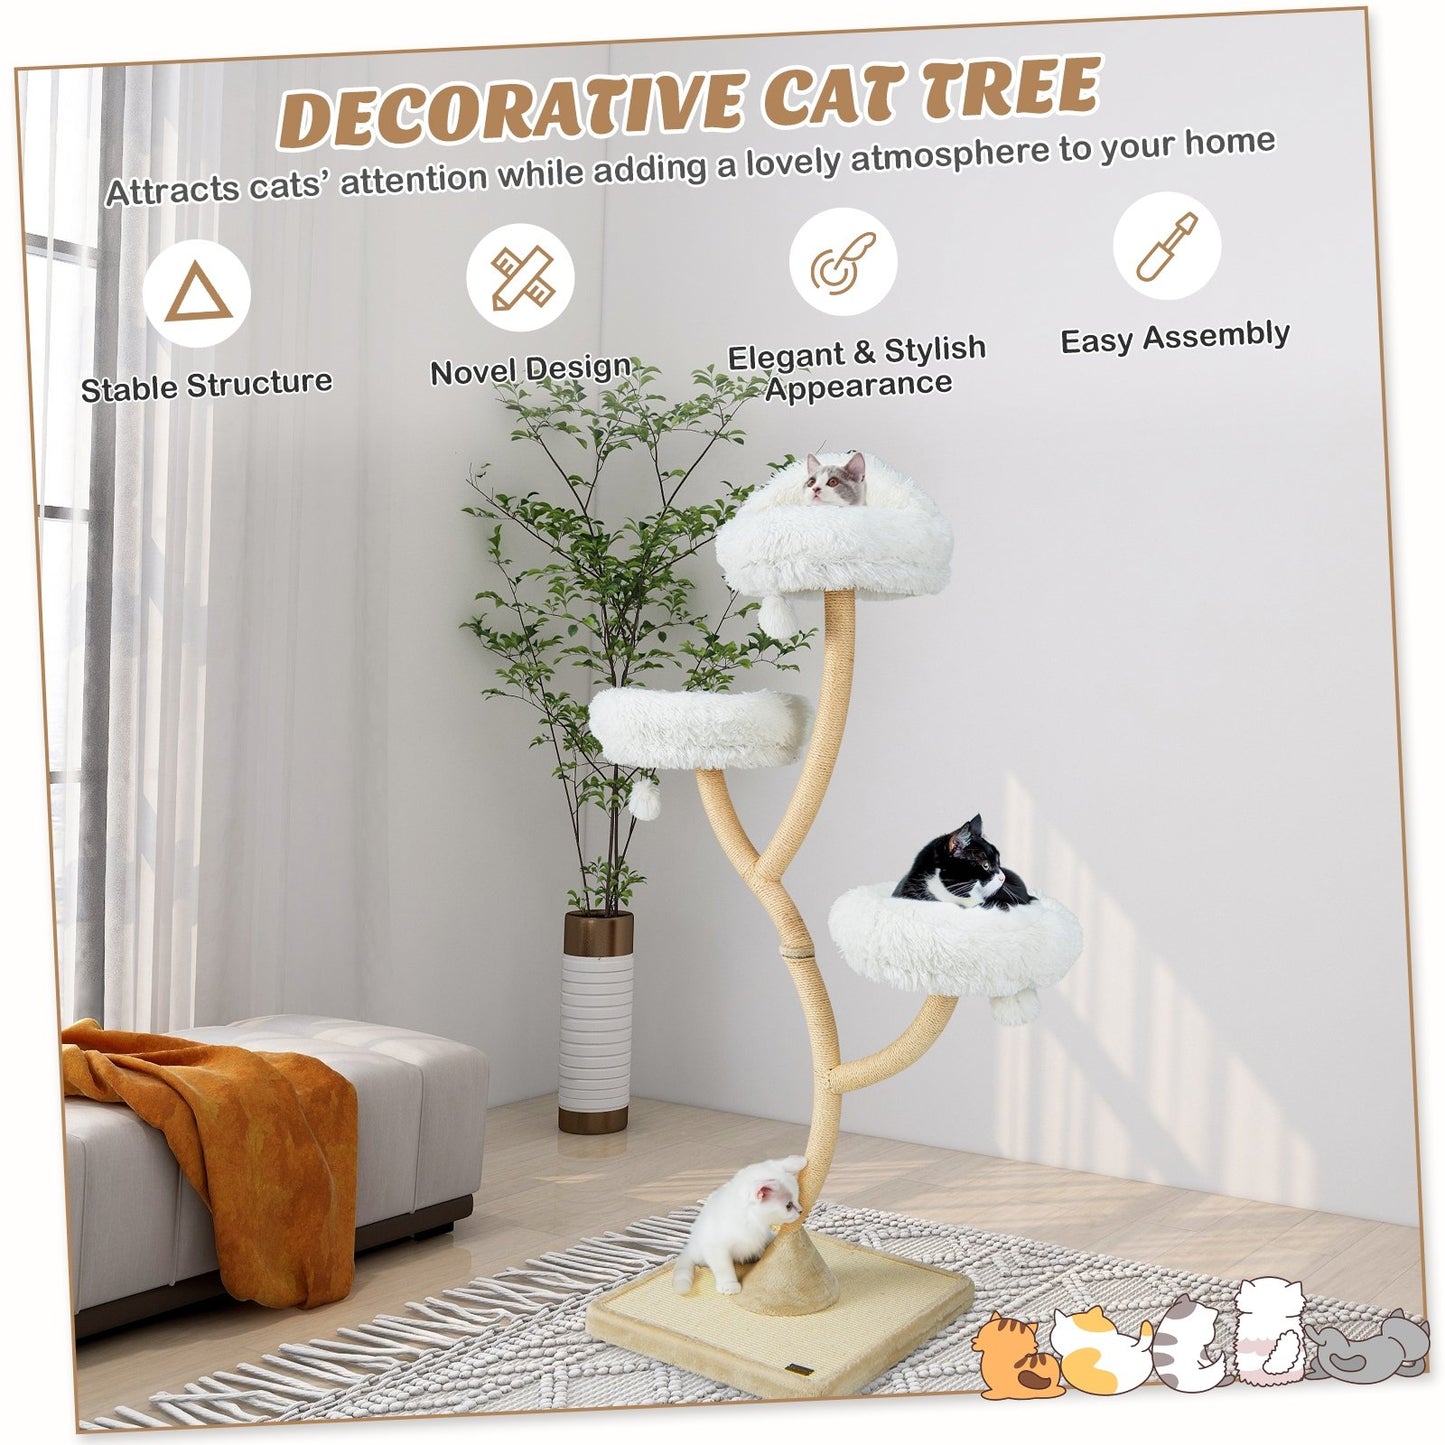 70" Tall Cat Tree 4-Layer Cat Tower with 3 Perches and Dangling Balls, Beige